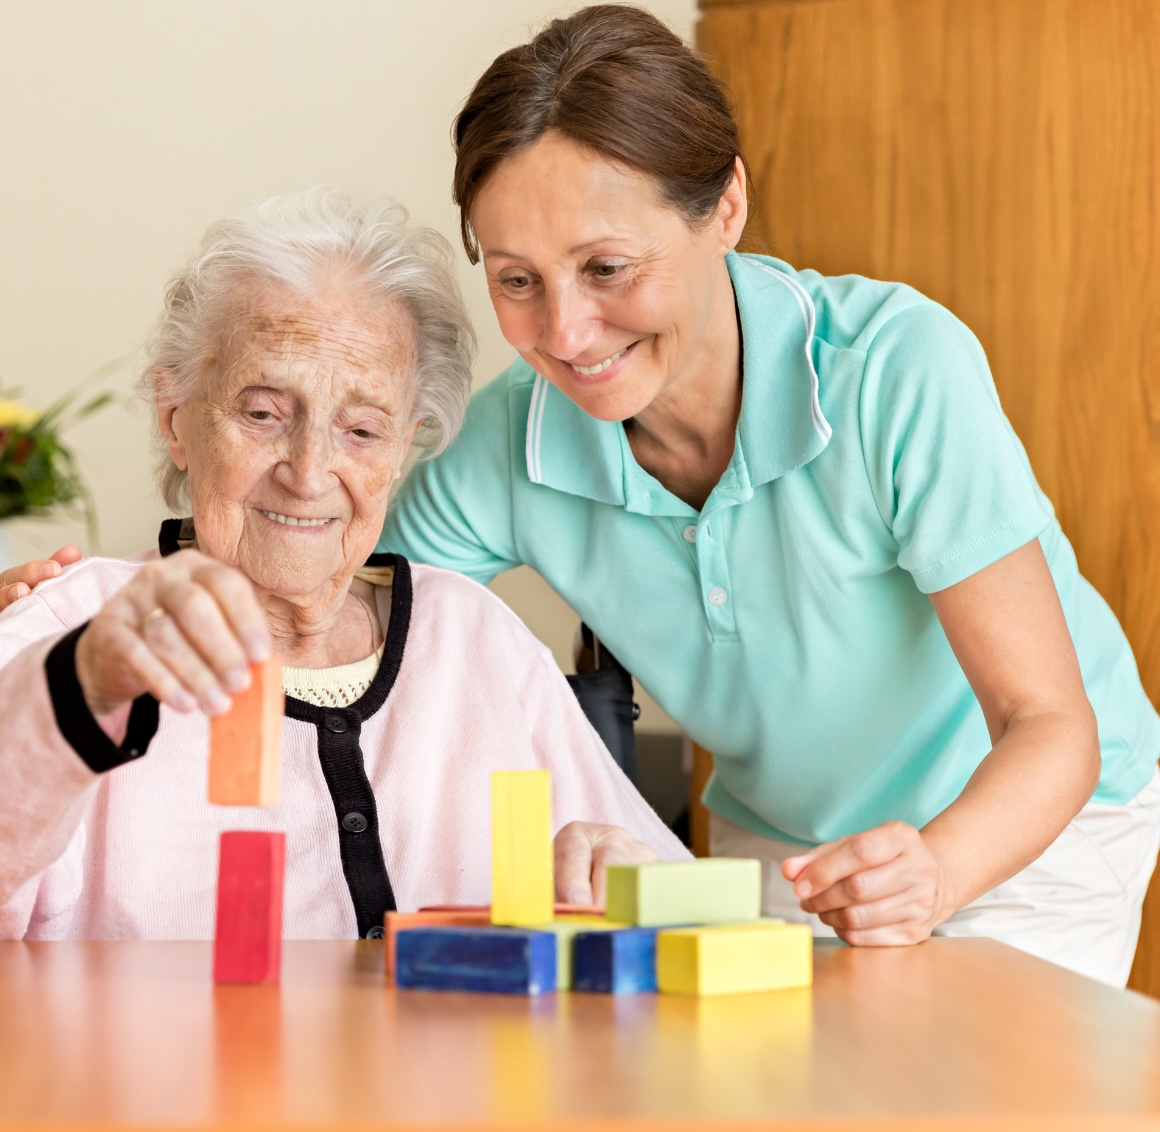 A caregiver helps a older client with a block activity to help keep her sharp, representing how dementia care in Orange can help.